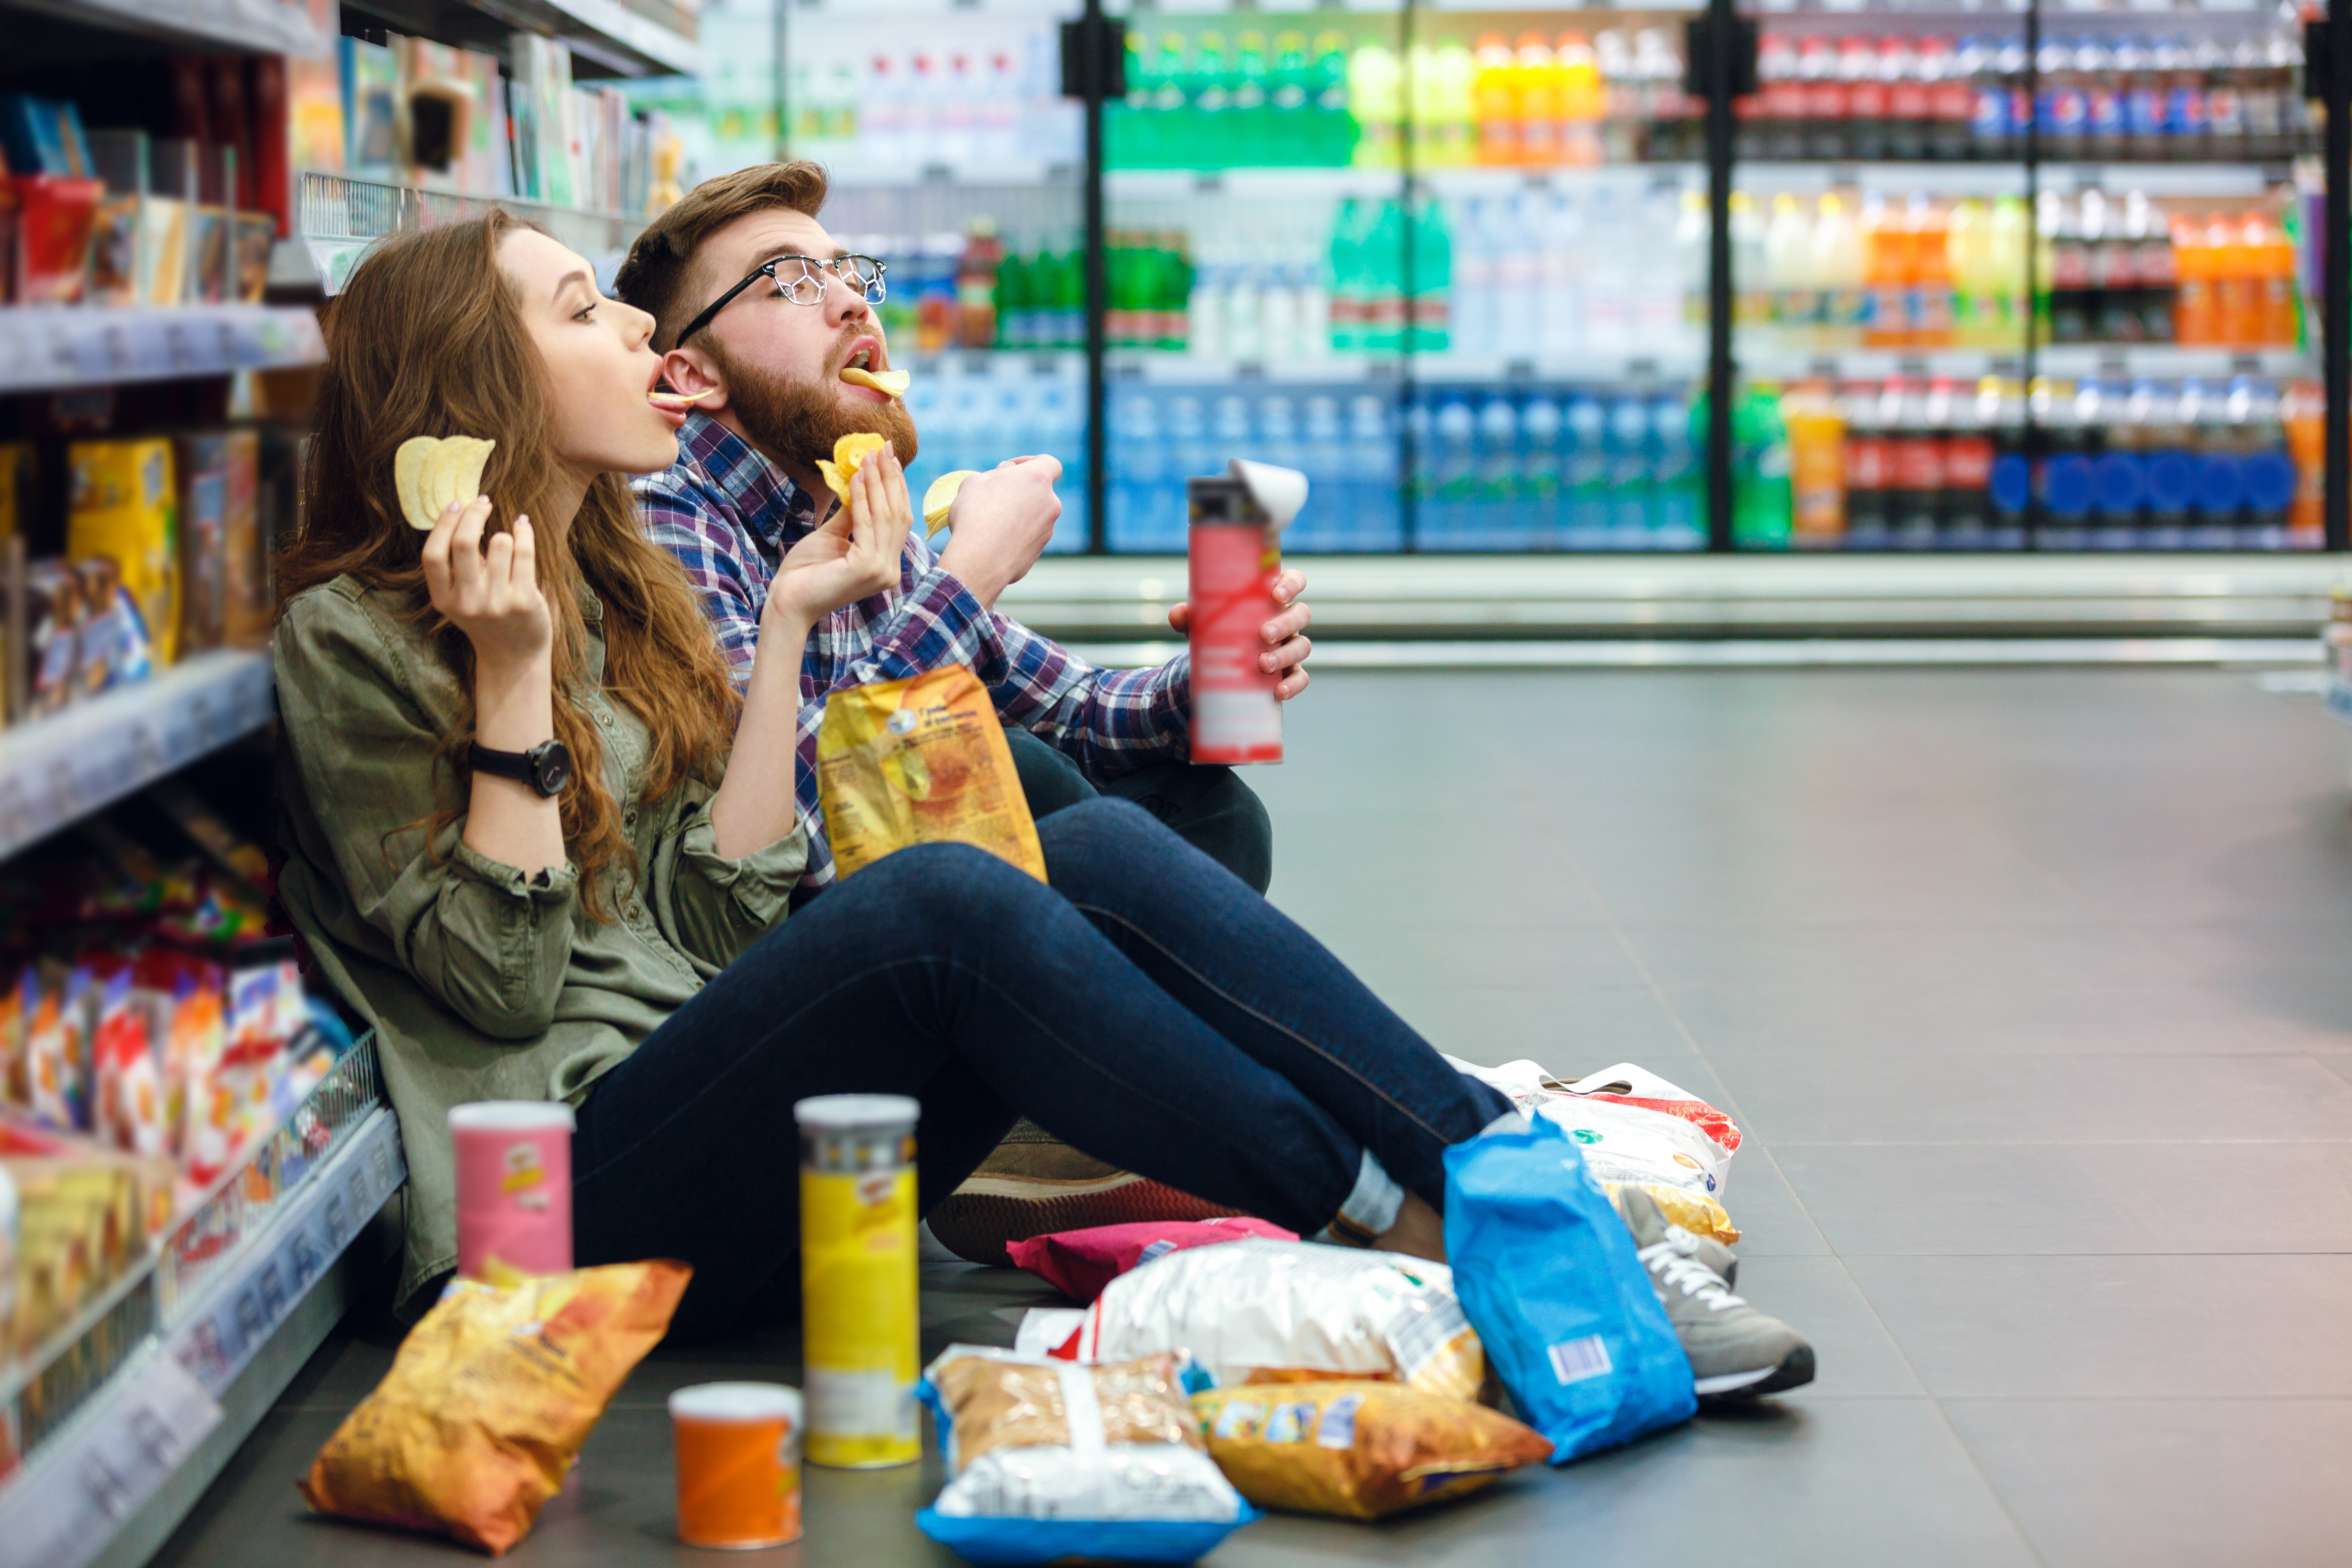 Couple sitting on the supermarket floor and eating snacks